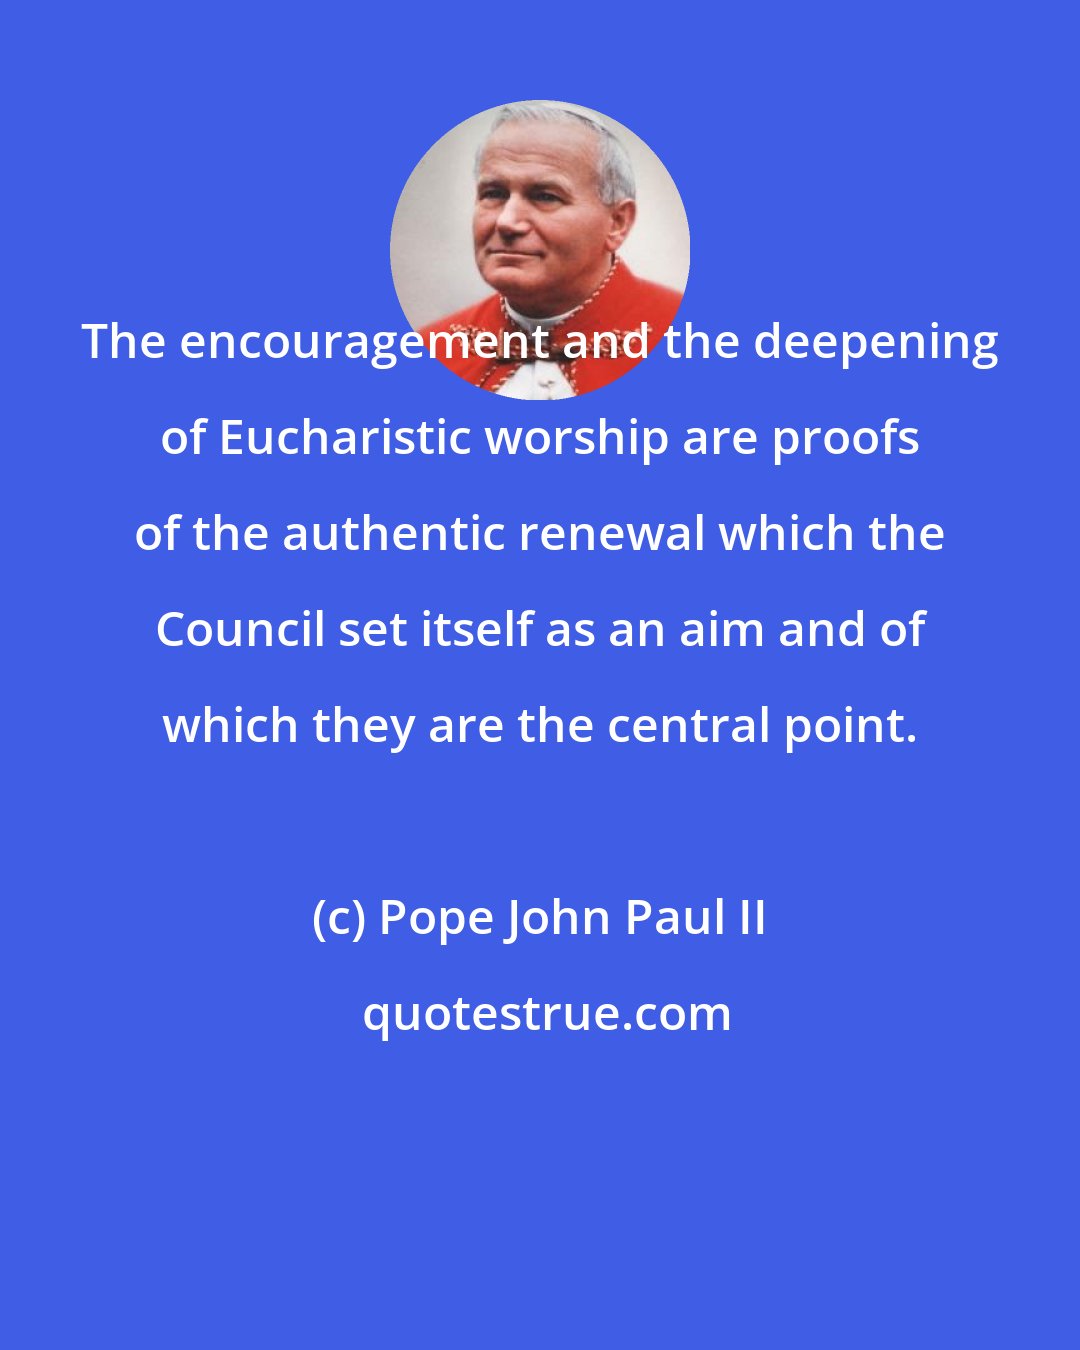 Pope John Paul II: The encouragement and the deepening of Eucharistic worship are proofs of the authentic renewal which the Council set itself as an aim and of which they are the central point.